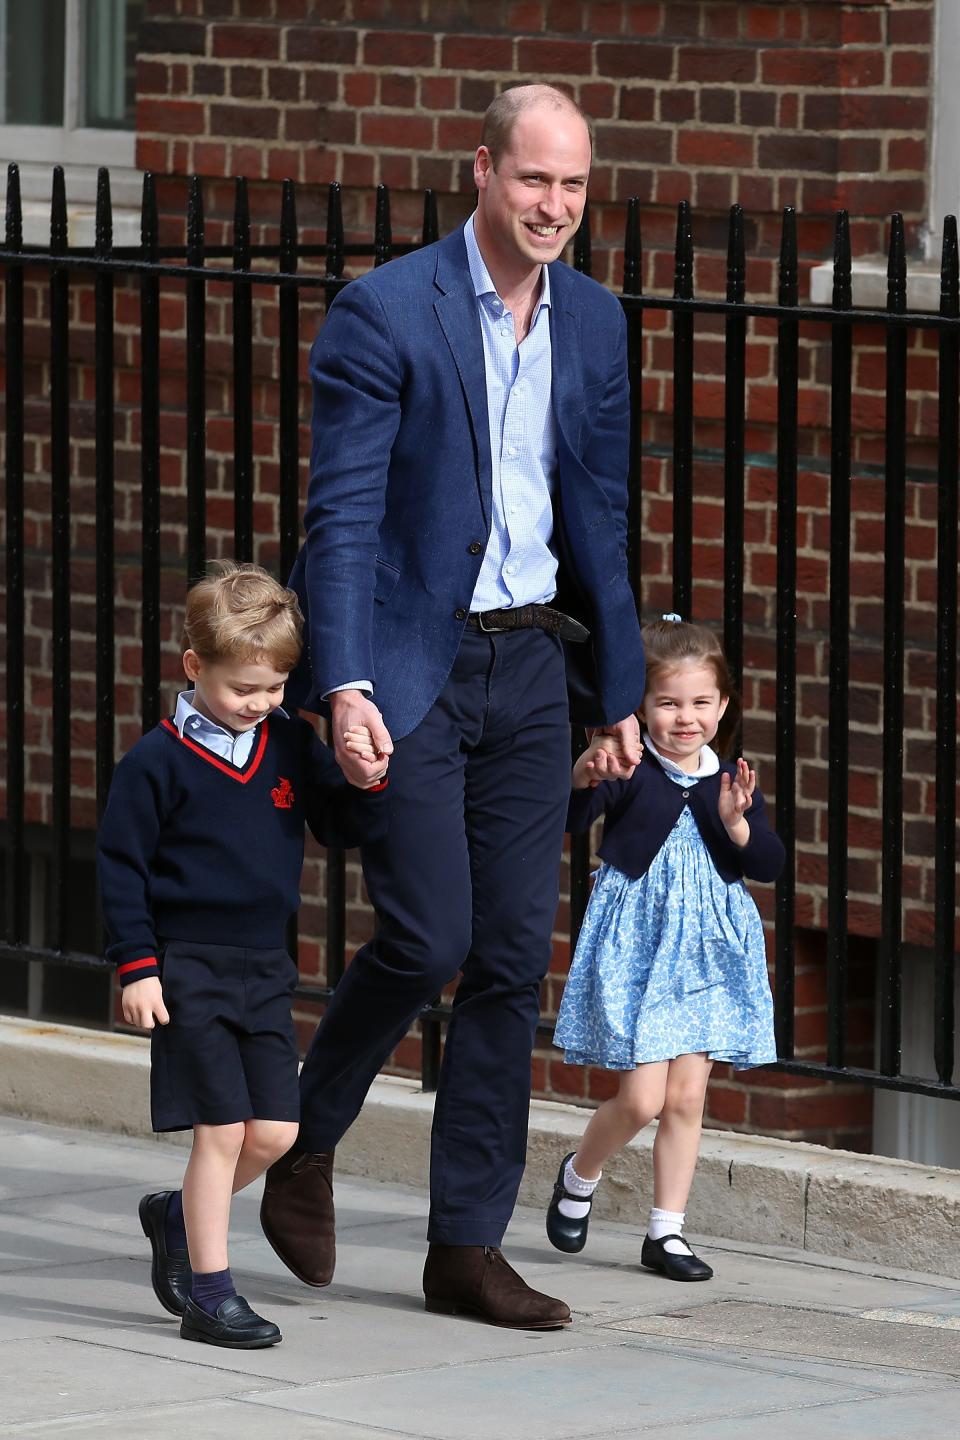 Prince William arrives at St. Mary's Hospital with Prince George and Princess Charlotte to see the new baby. (Photo: Neil Mockford via Getty Images)